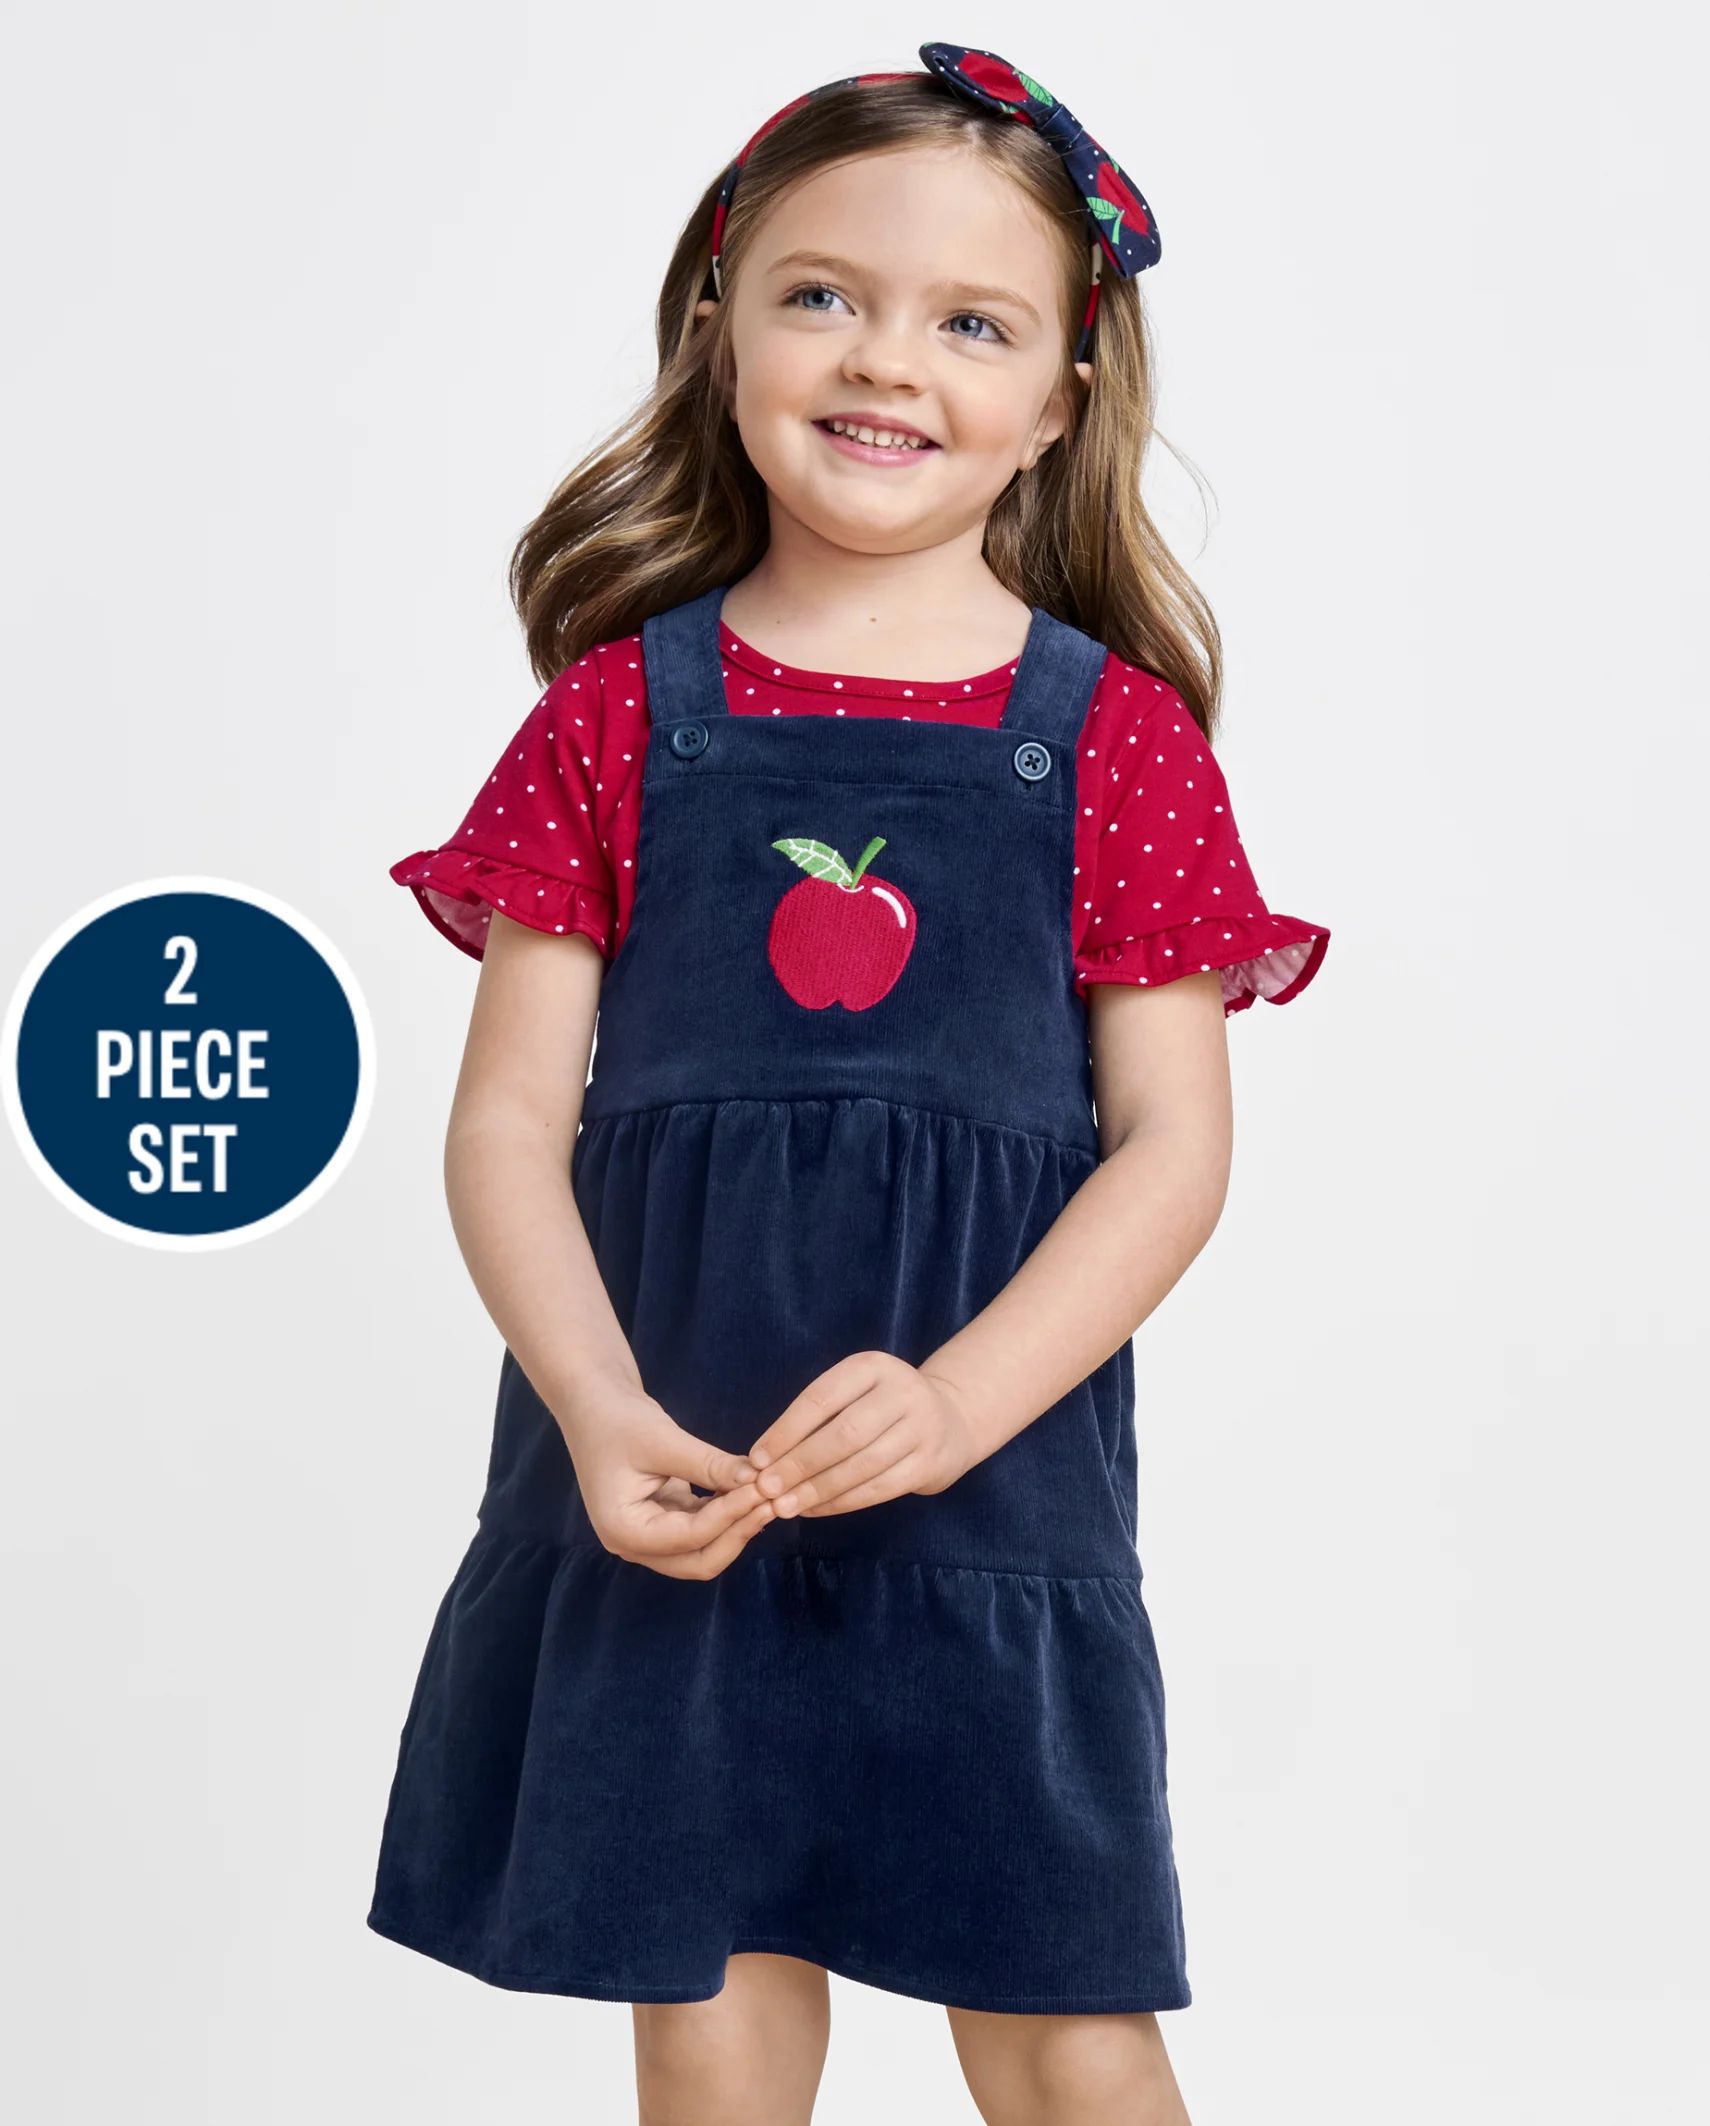 Toddler Girls Apple Corduroy Skirtall 2-Piece Set - ruby | The Children's Place